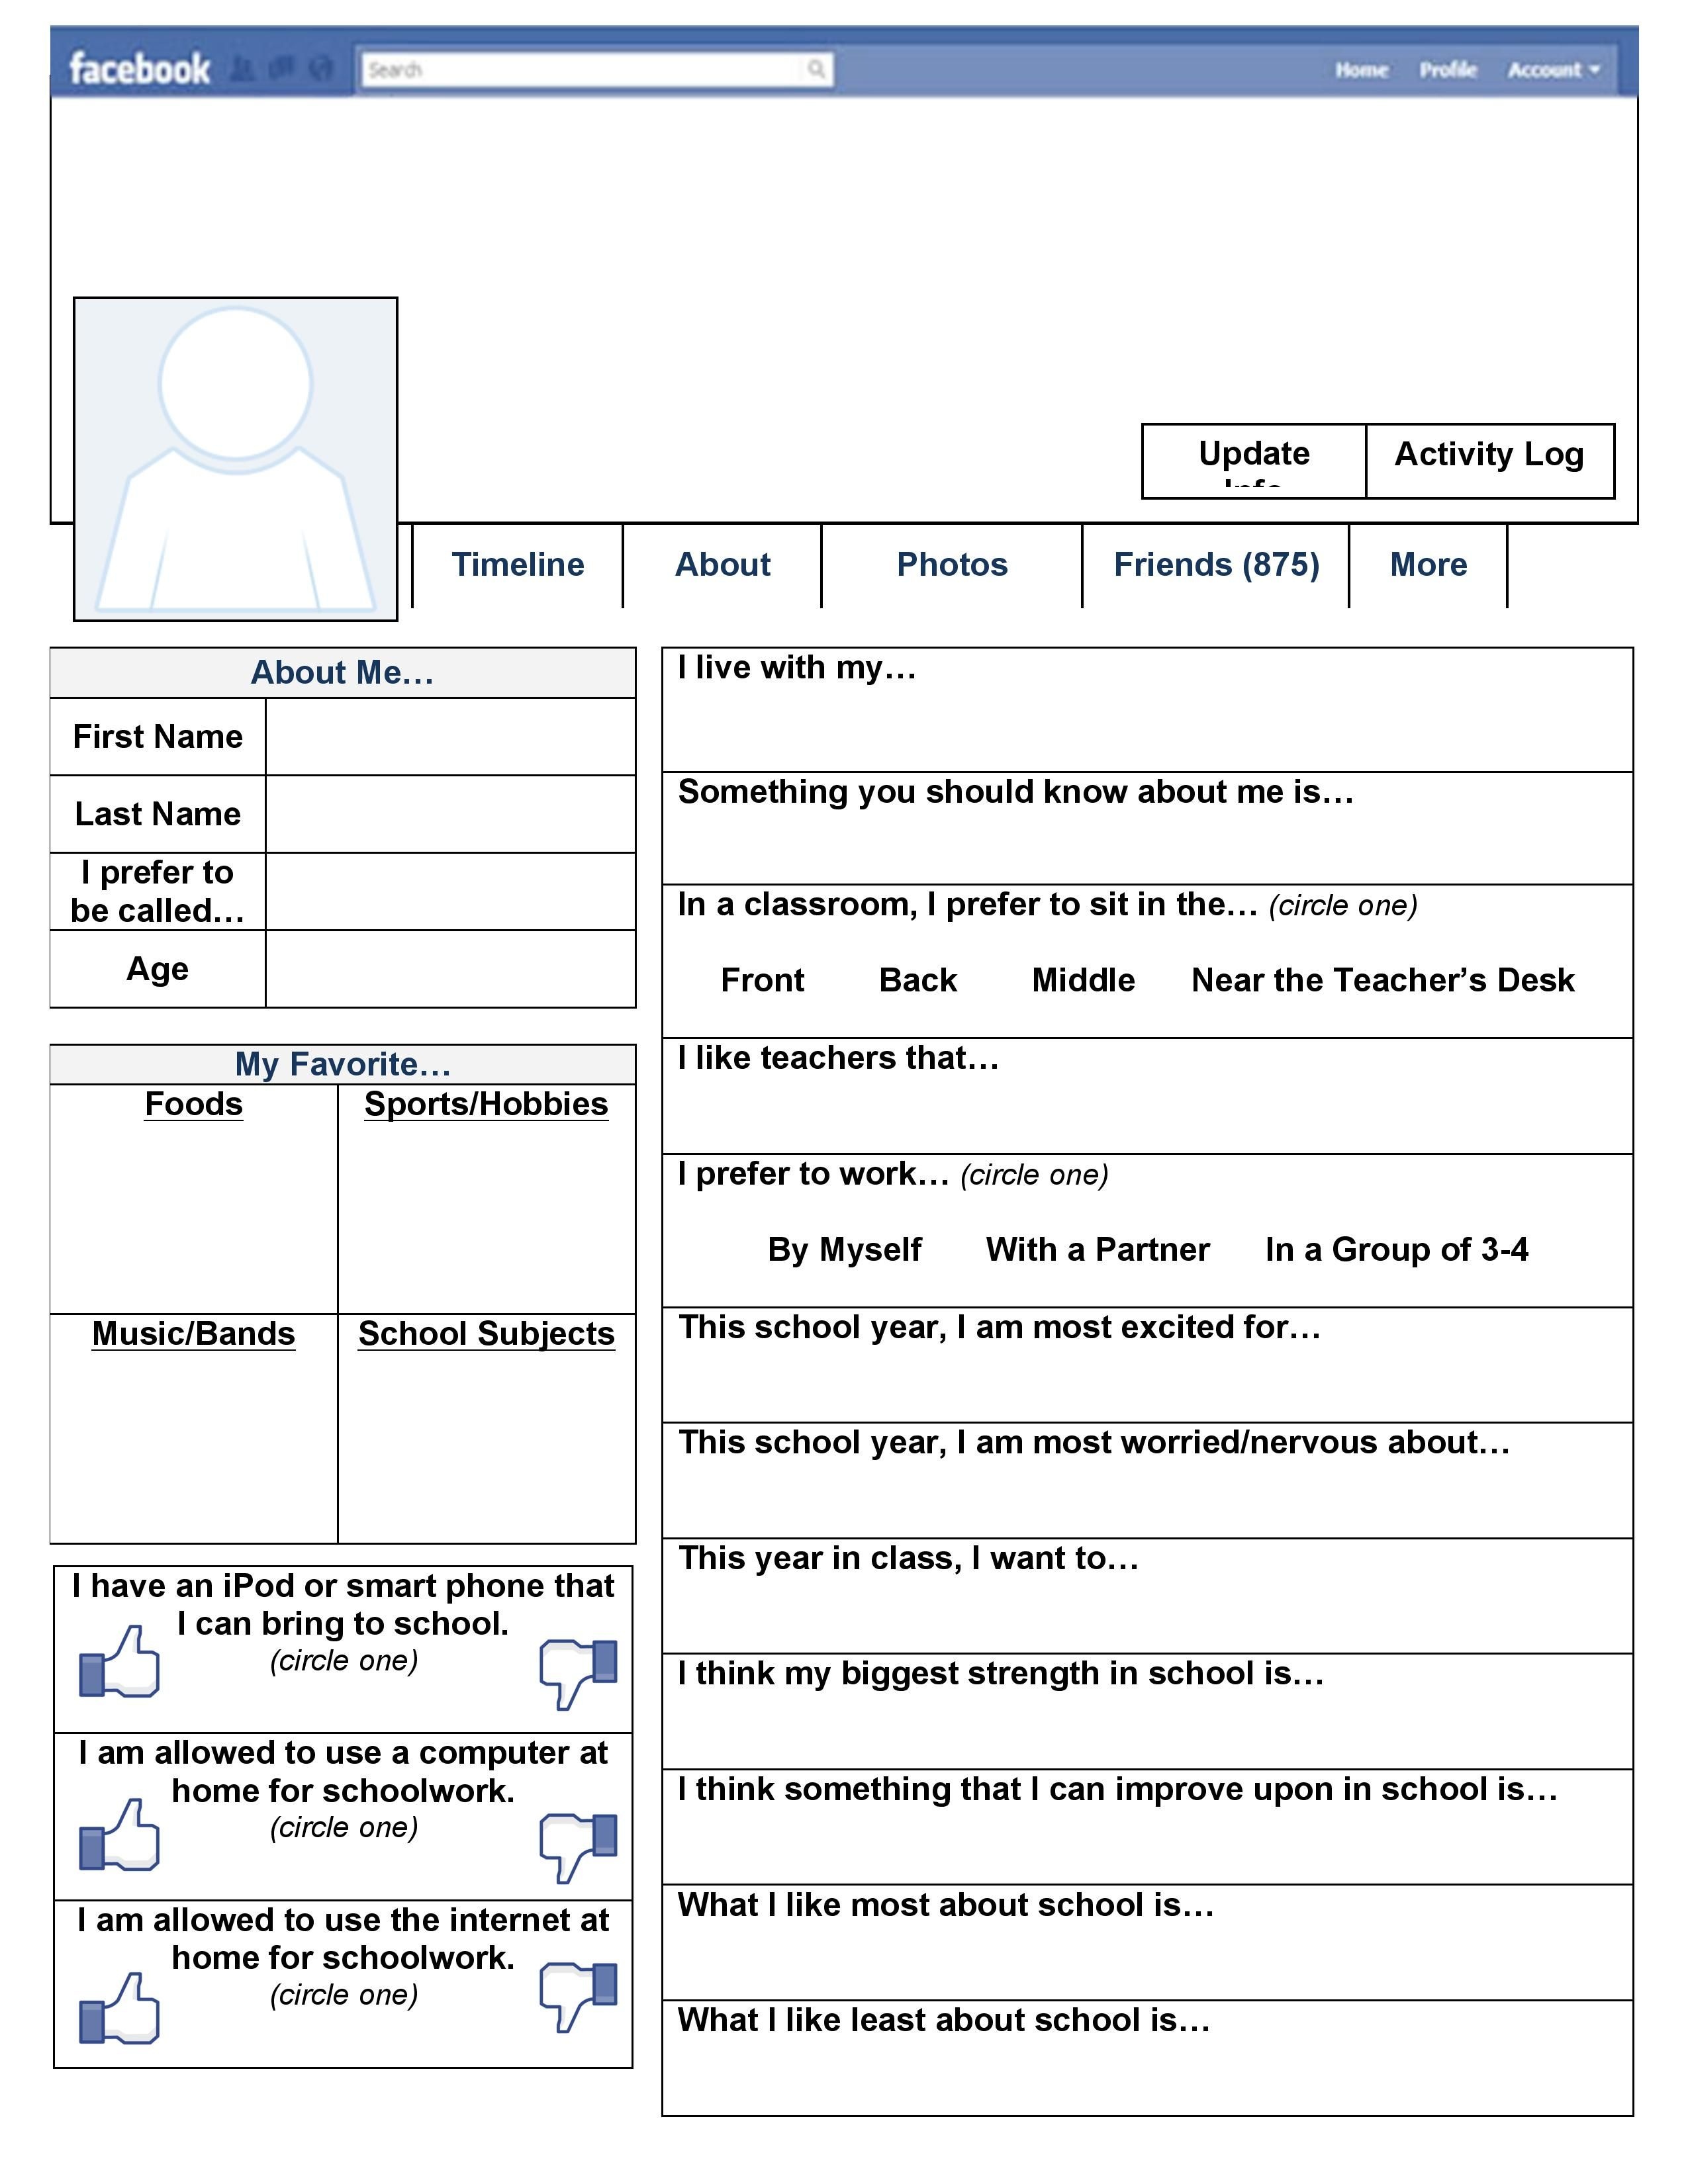 A Free Printable &amp;quot;facebook&amp;quot; Page To Use On The First Day Of School - Free Learning Style Inventory For Students Printable